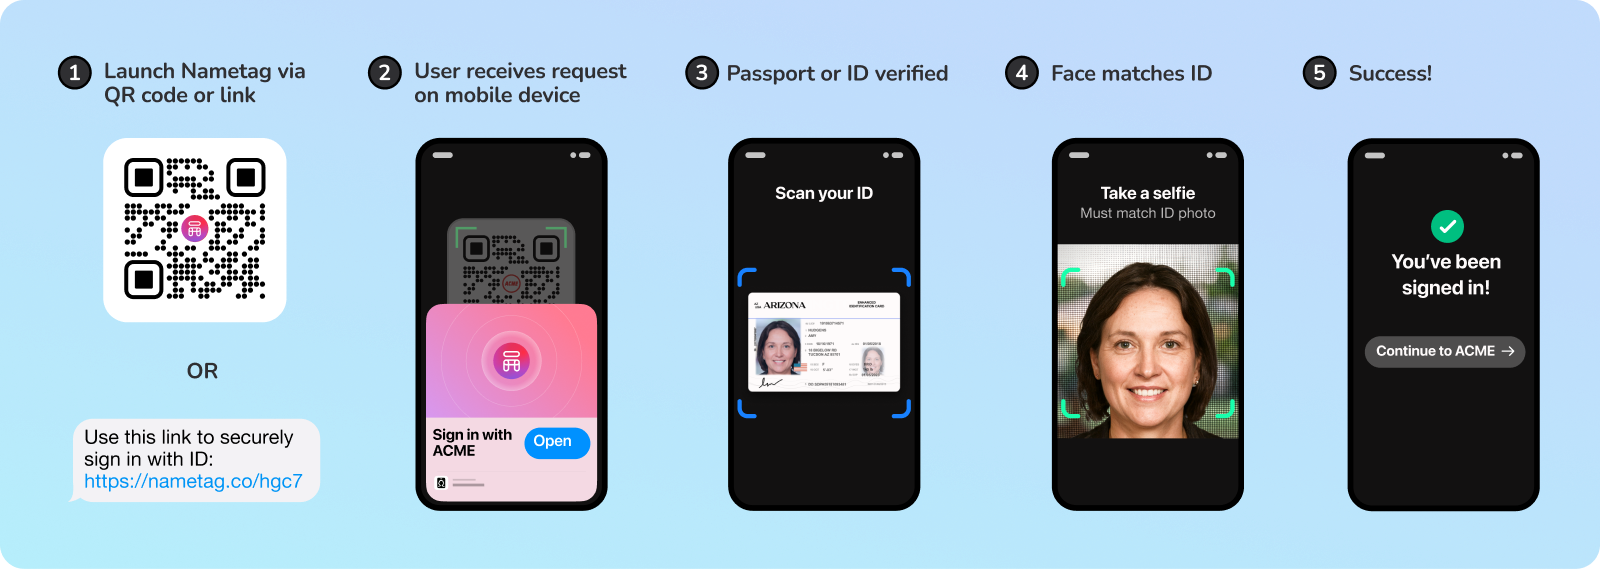 The step by step flow of how identity verification works using Nametag